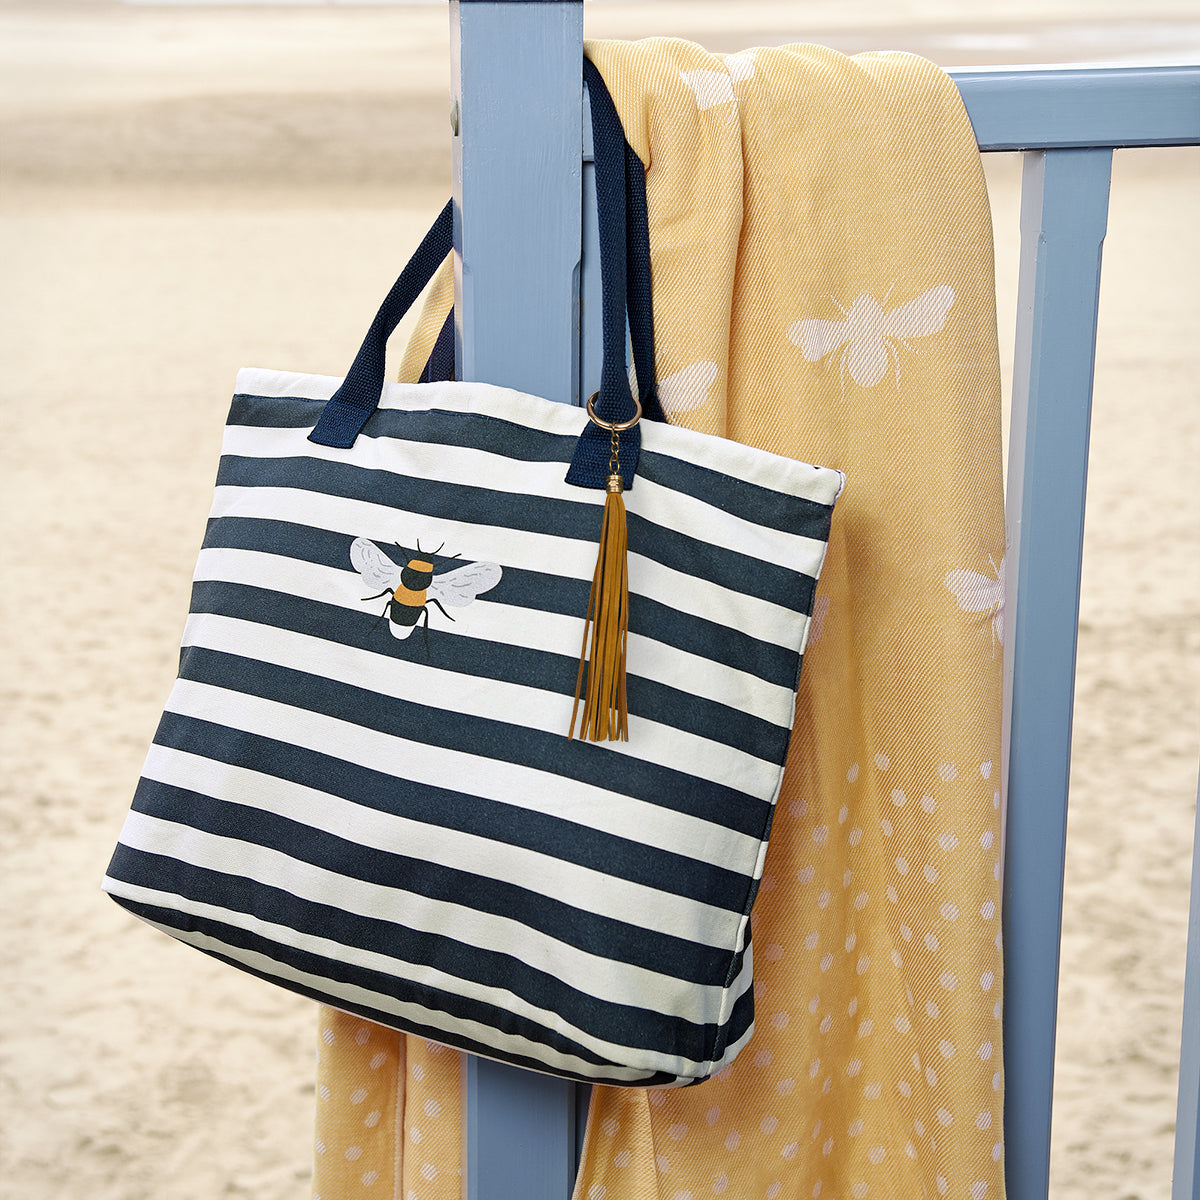 Sophie Allport's yellow hammam towel covered white bees slung over a beach hut post.